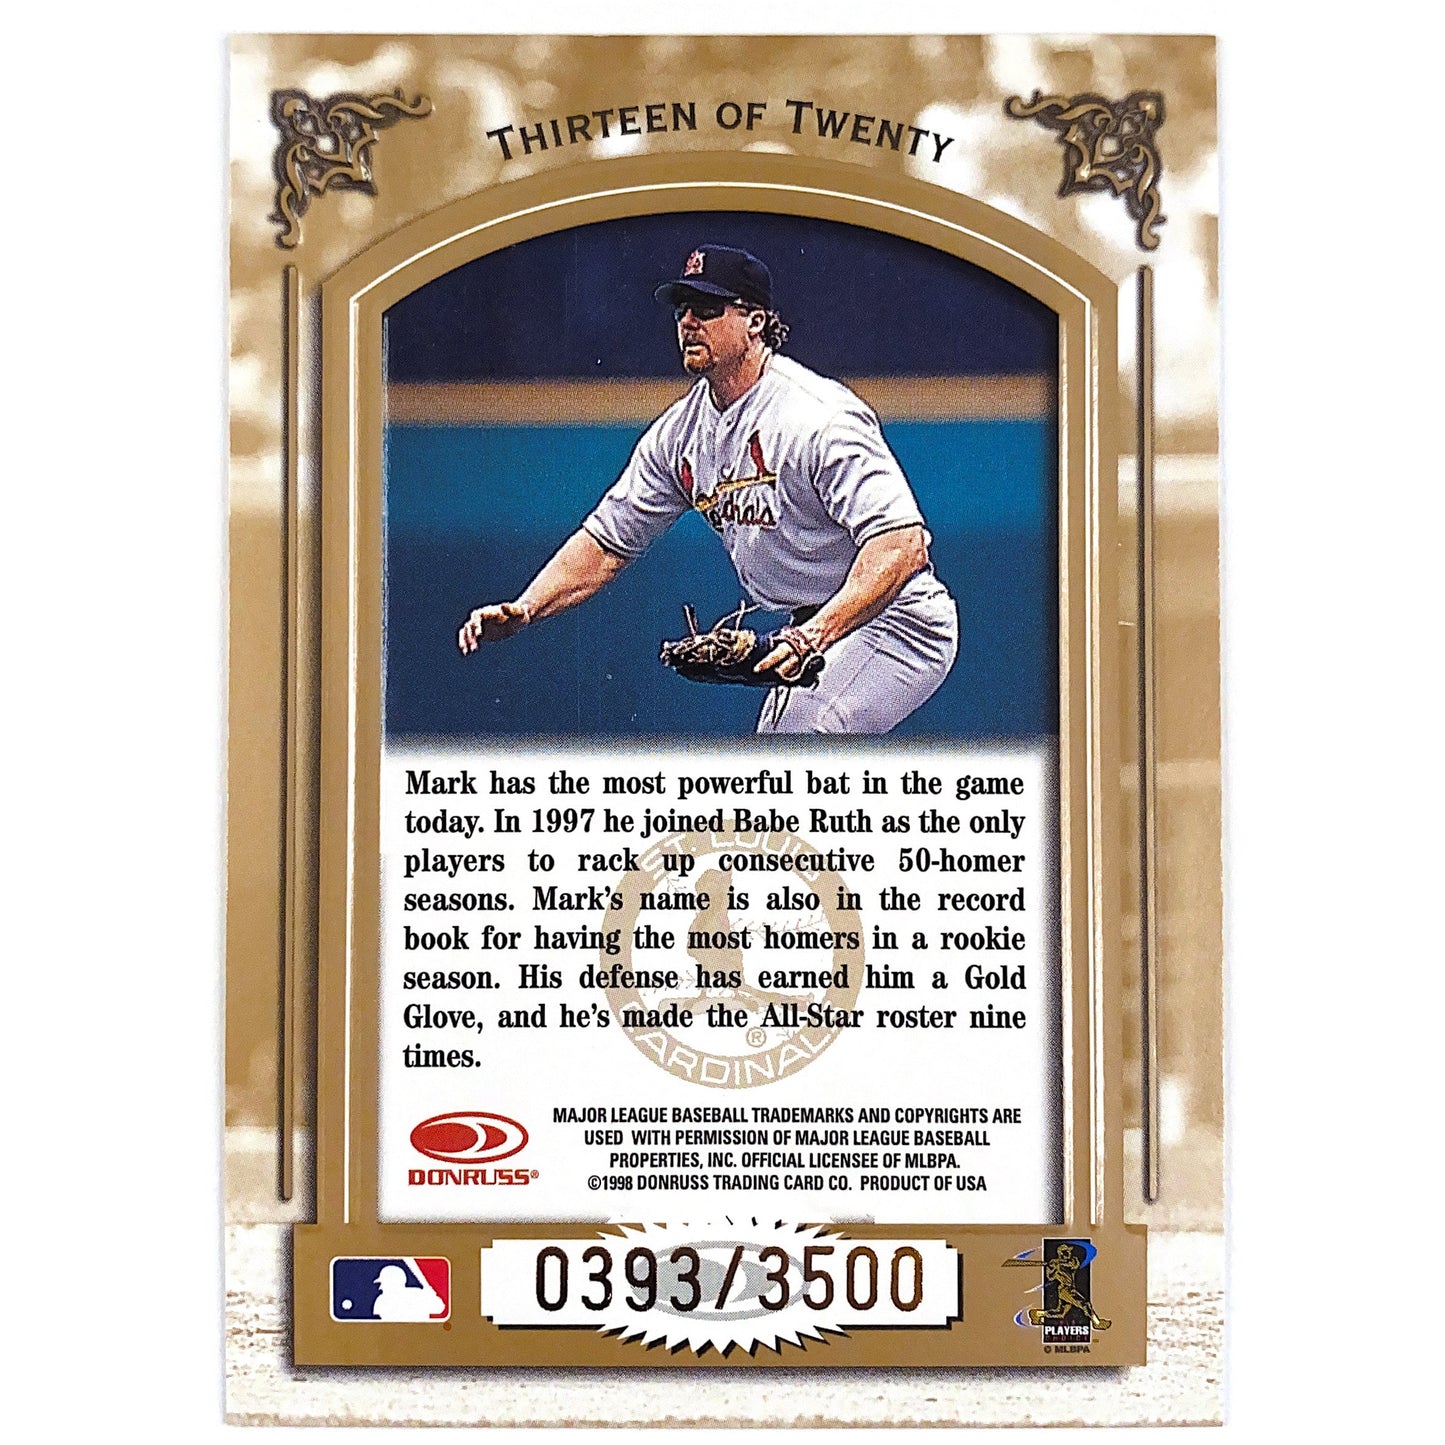 1998 Leaf 50th Anniversary Mark McGwire Heading to the Hall Holo Foil /3500